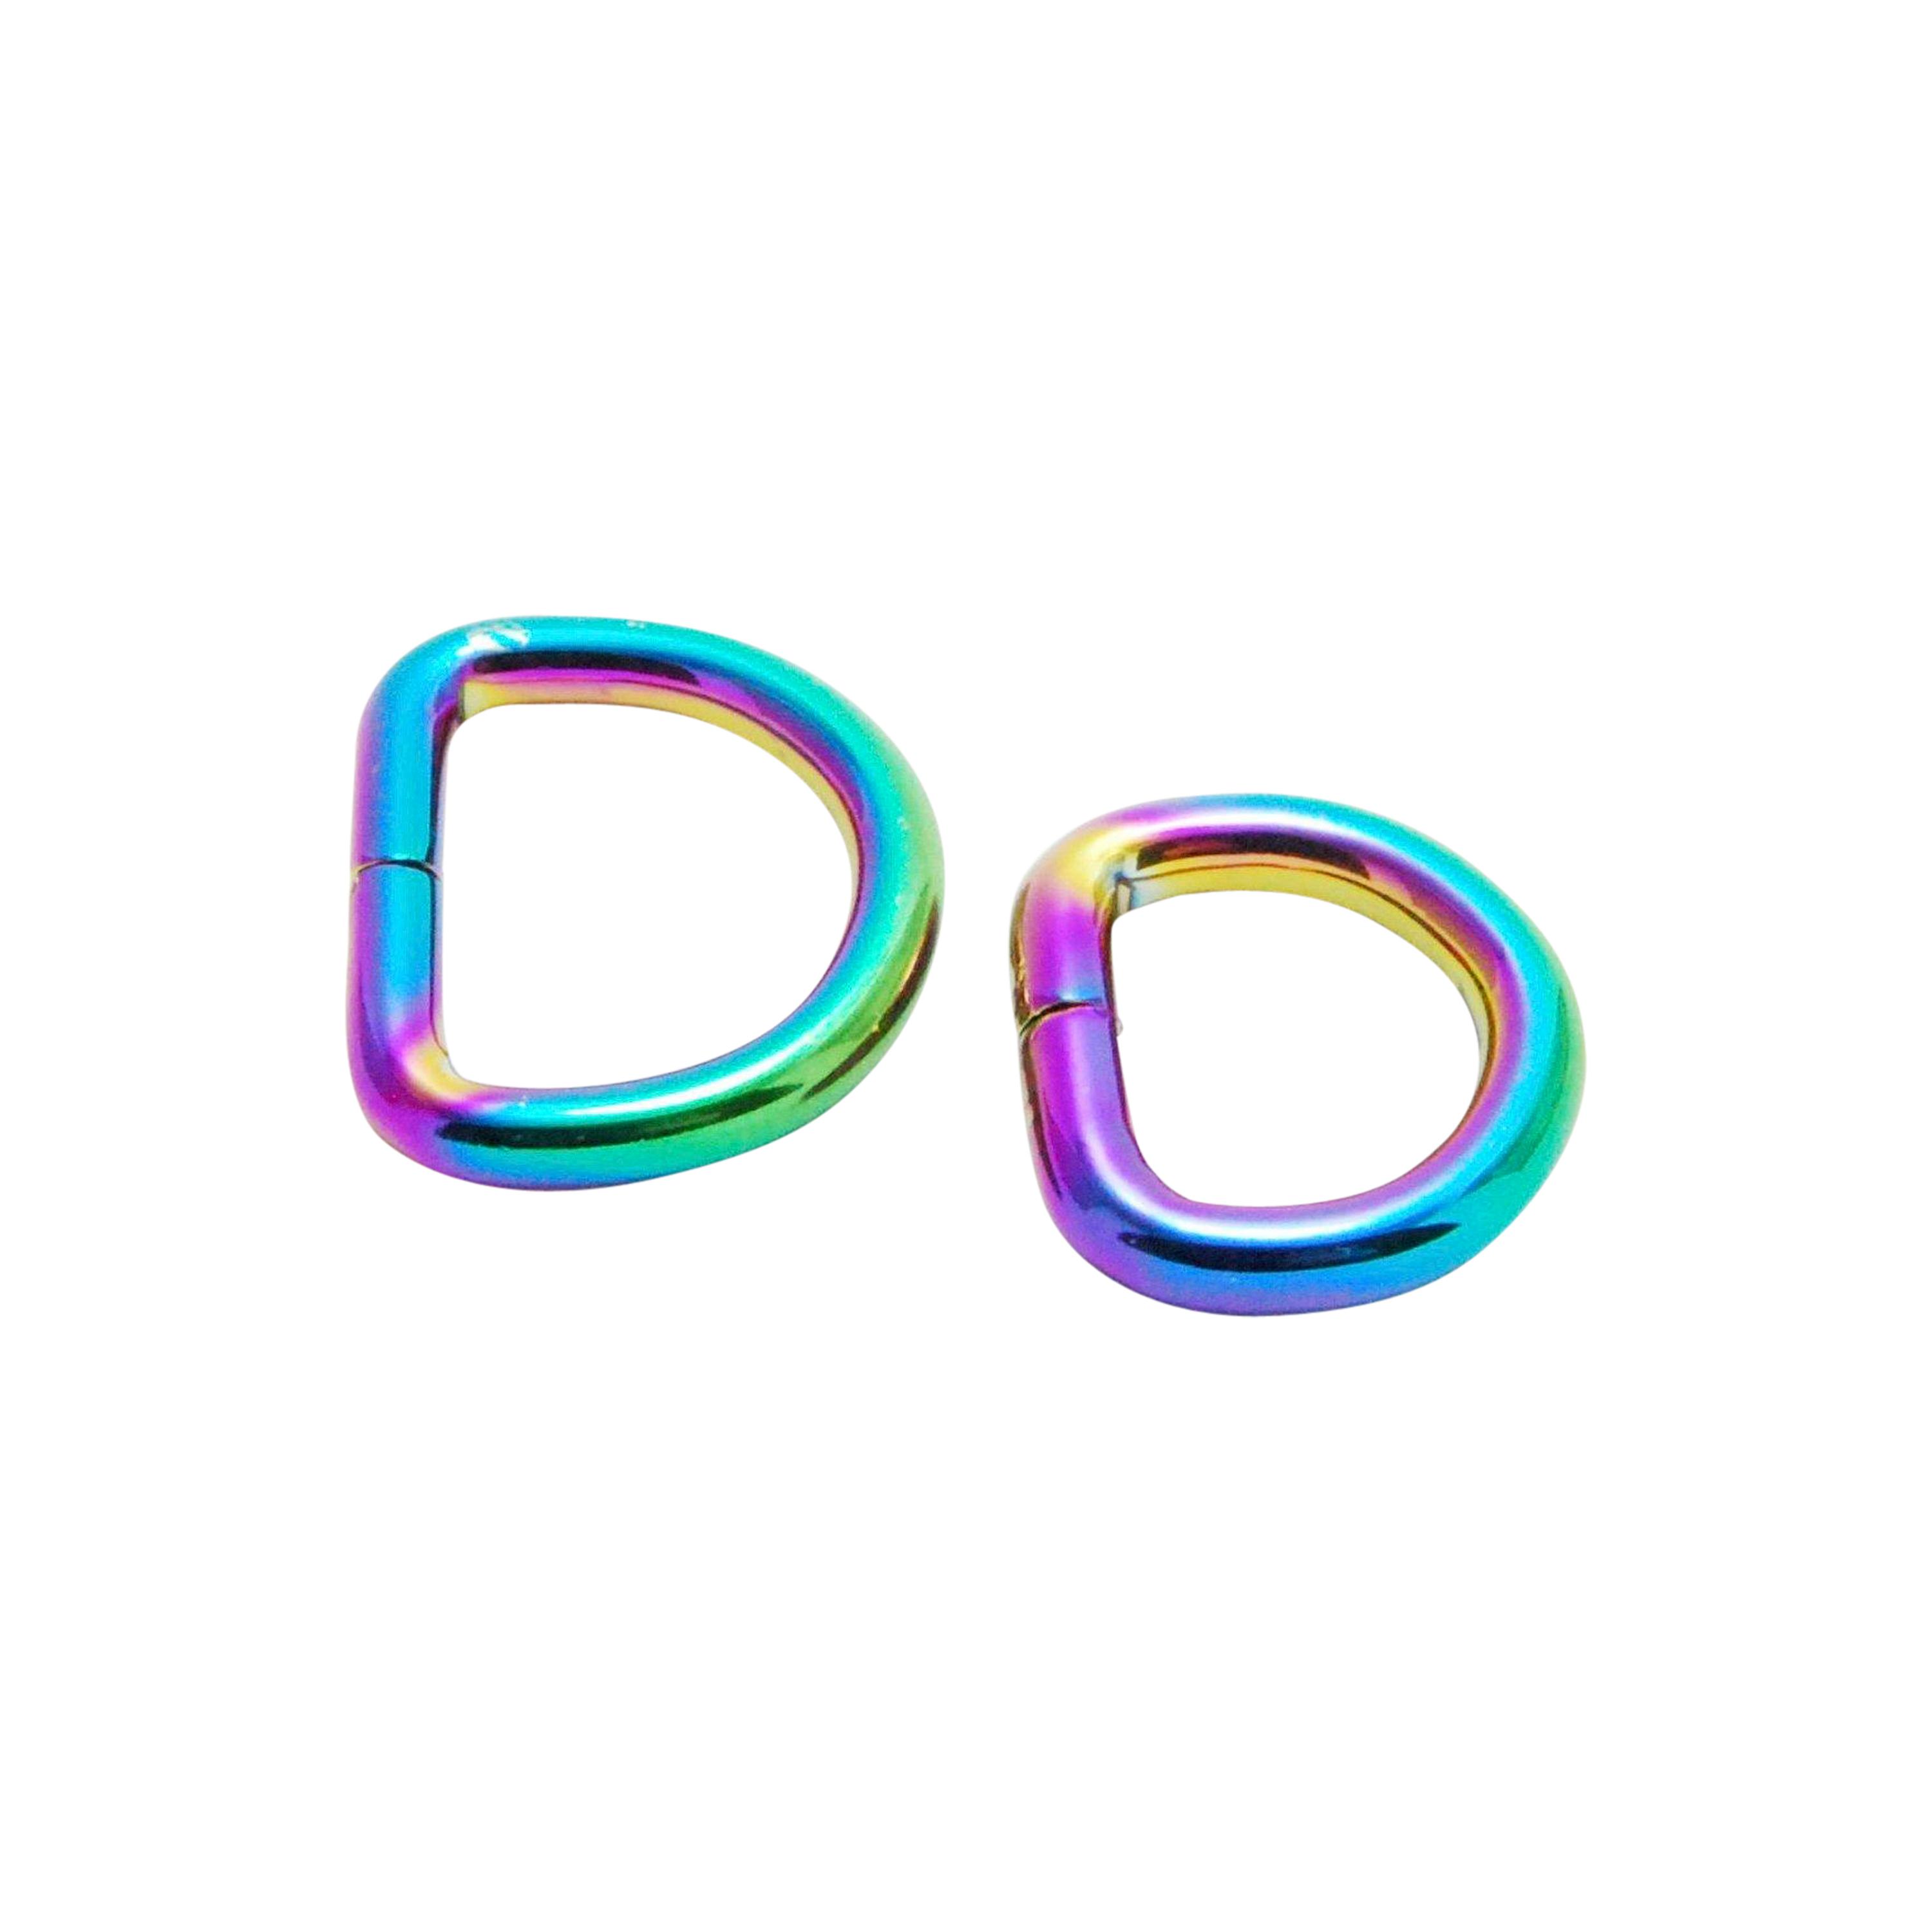 Chunky Rainbow D rings available in 3 sizes 1/2" (12mm), 3/4" (20mm) and 1" (25mm)